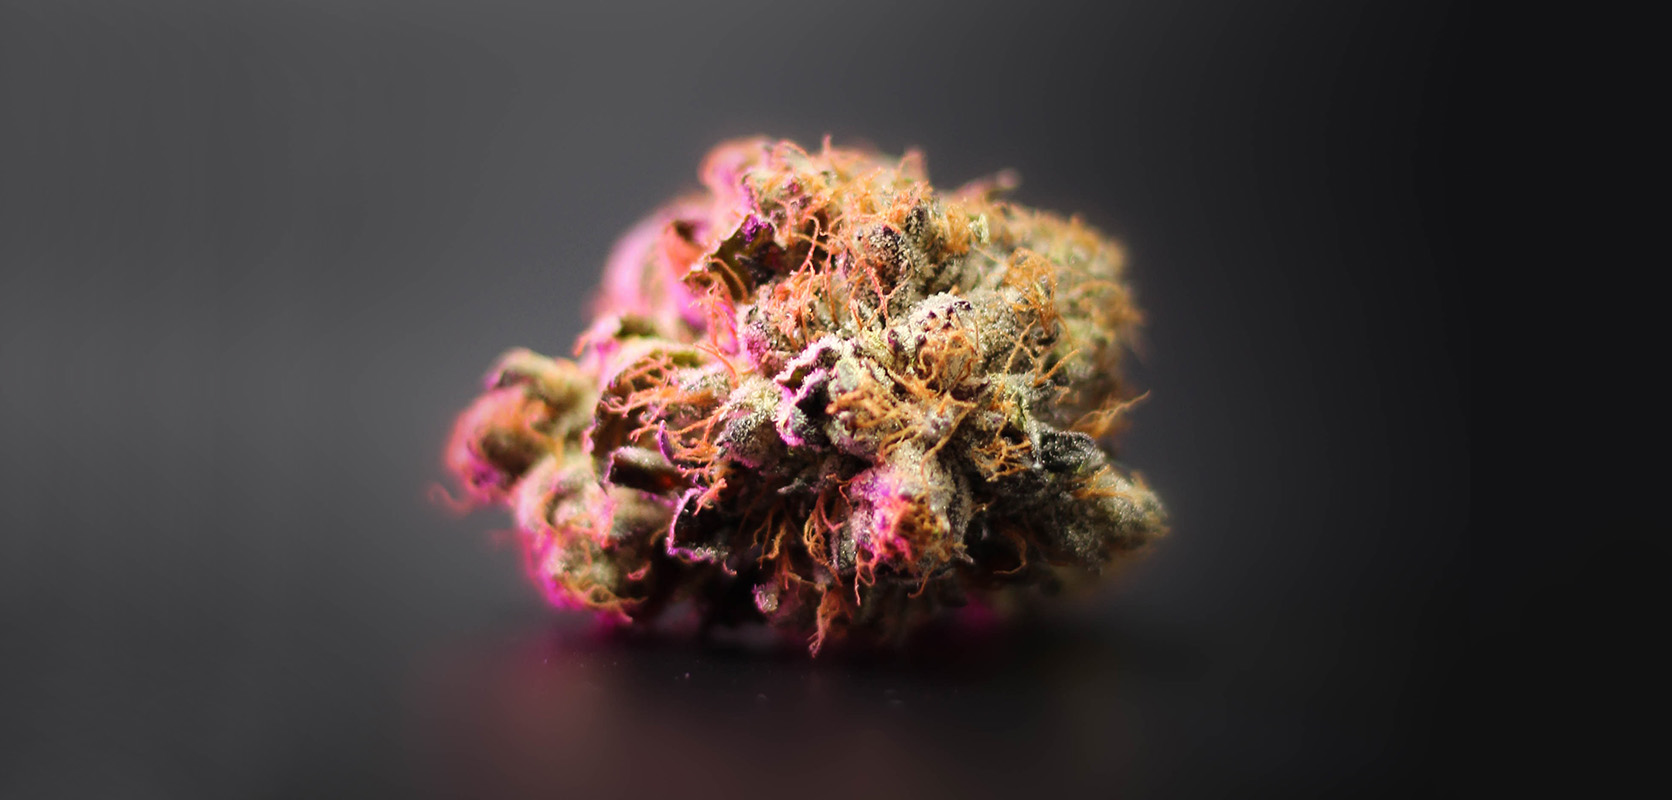 Pinkman Goo weed buds from BC cannabis online dispensary Low Price Bud. Alberta cannabis dispensary. Online dispensary for cheap weed, shatter, gummy, and value buds.